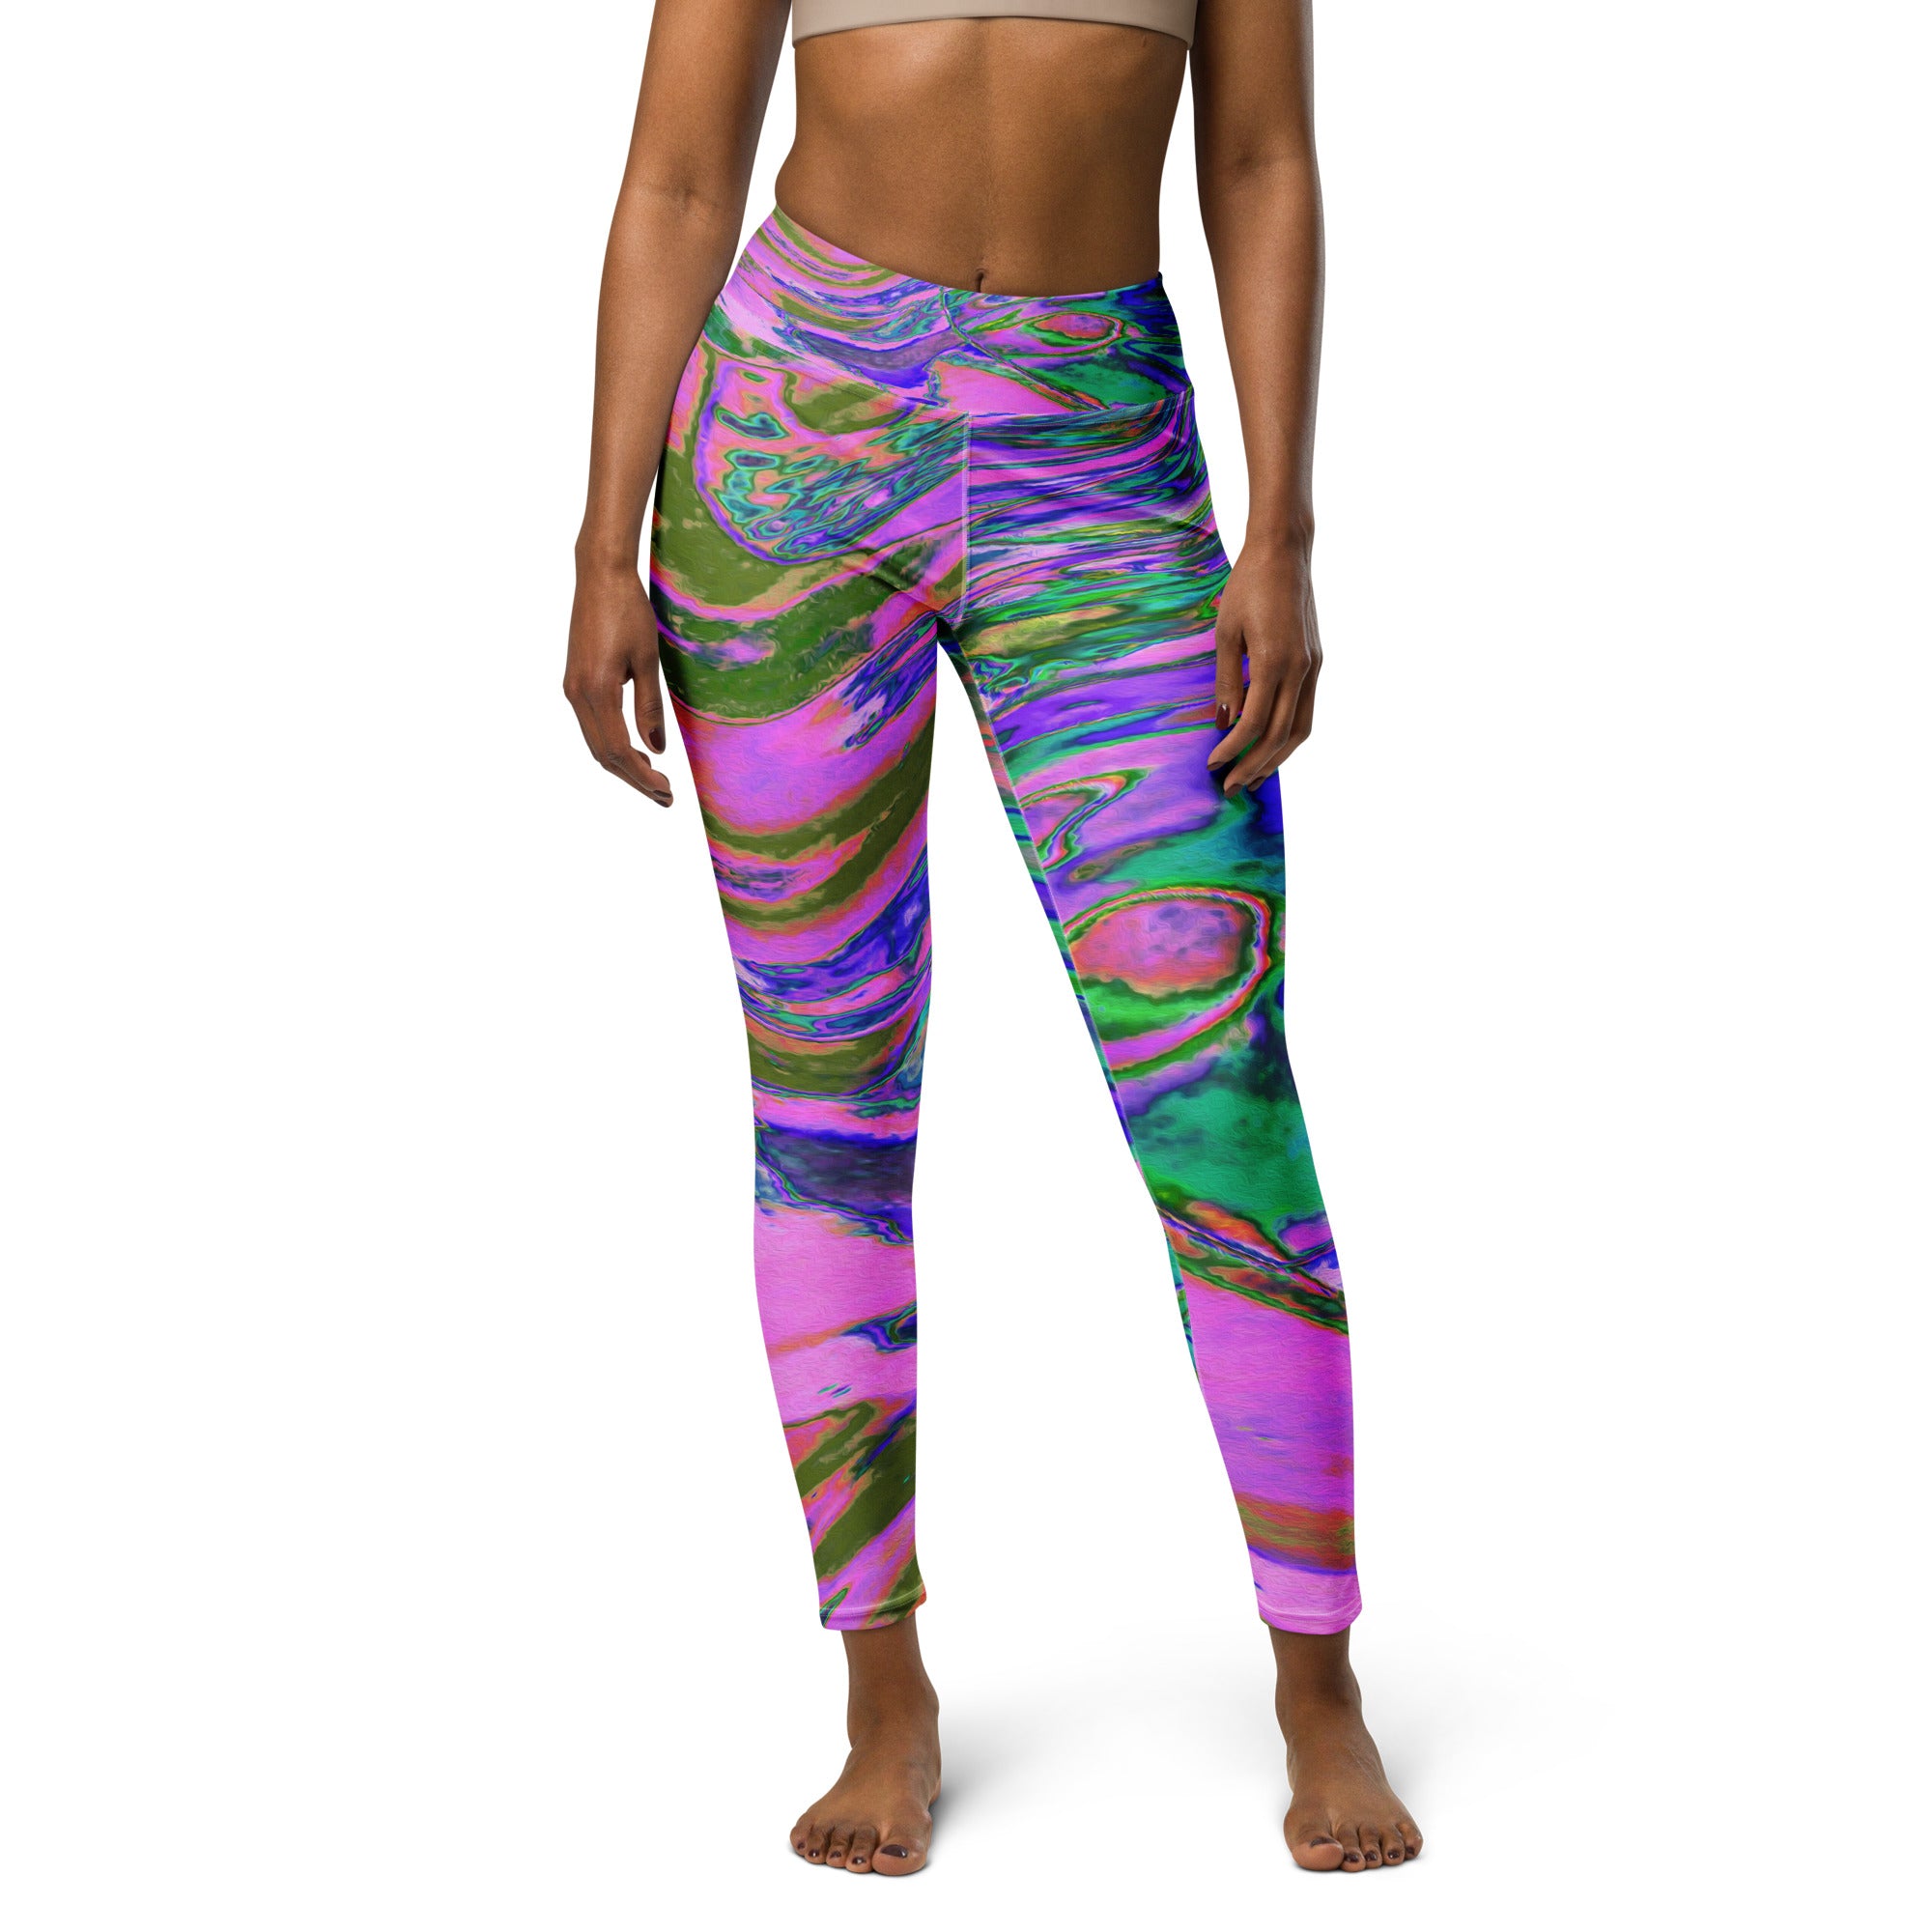 Yoga Leggings for Women - Cool Abstract Chartreuse and Hot Pink Groovy Retro